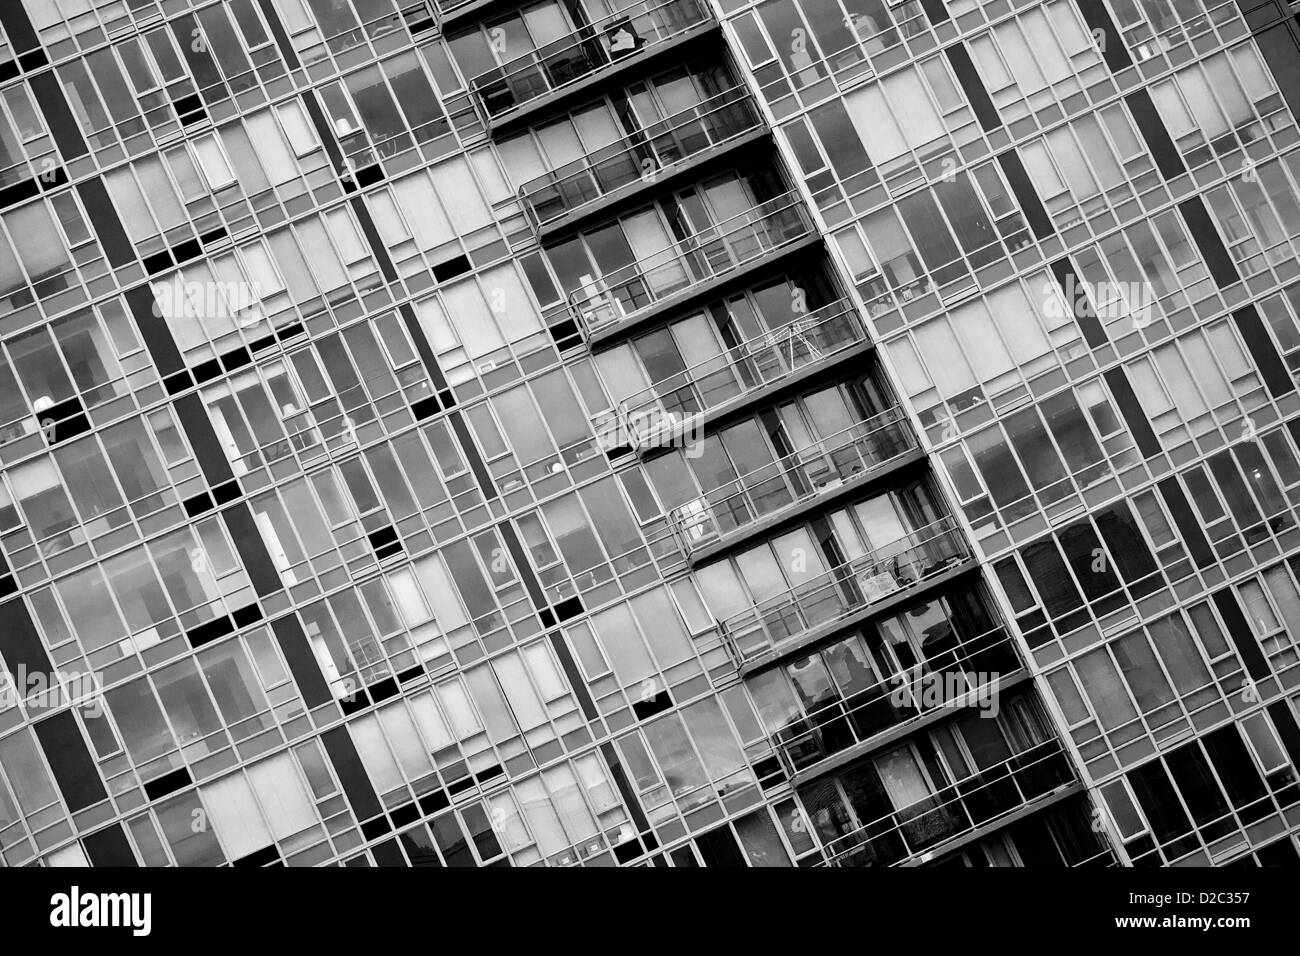 lines of steel and glass, windows of different sizes, urban architecture, part of the urban landscape for an abstract image Stock Photo